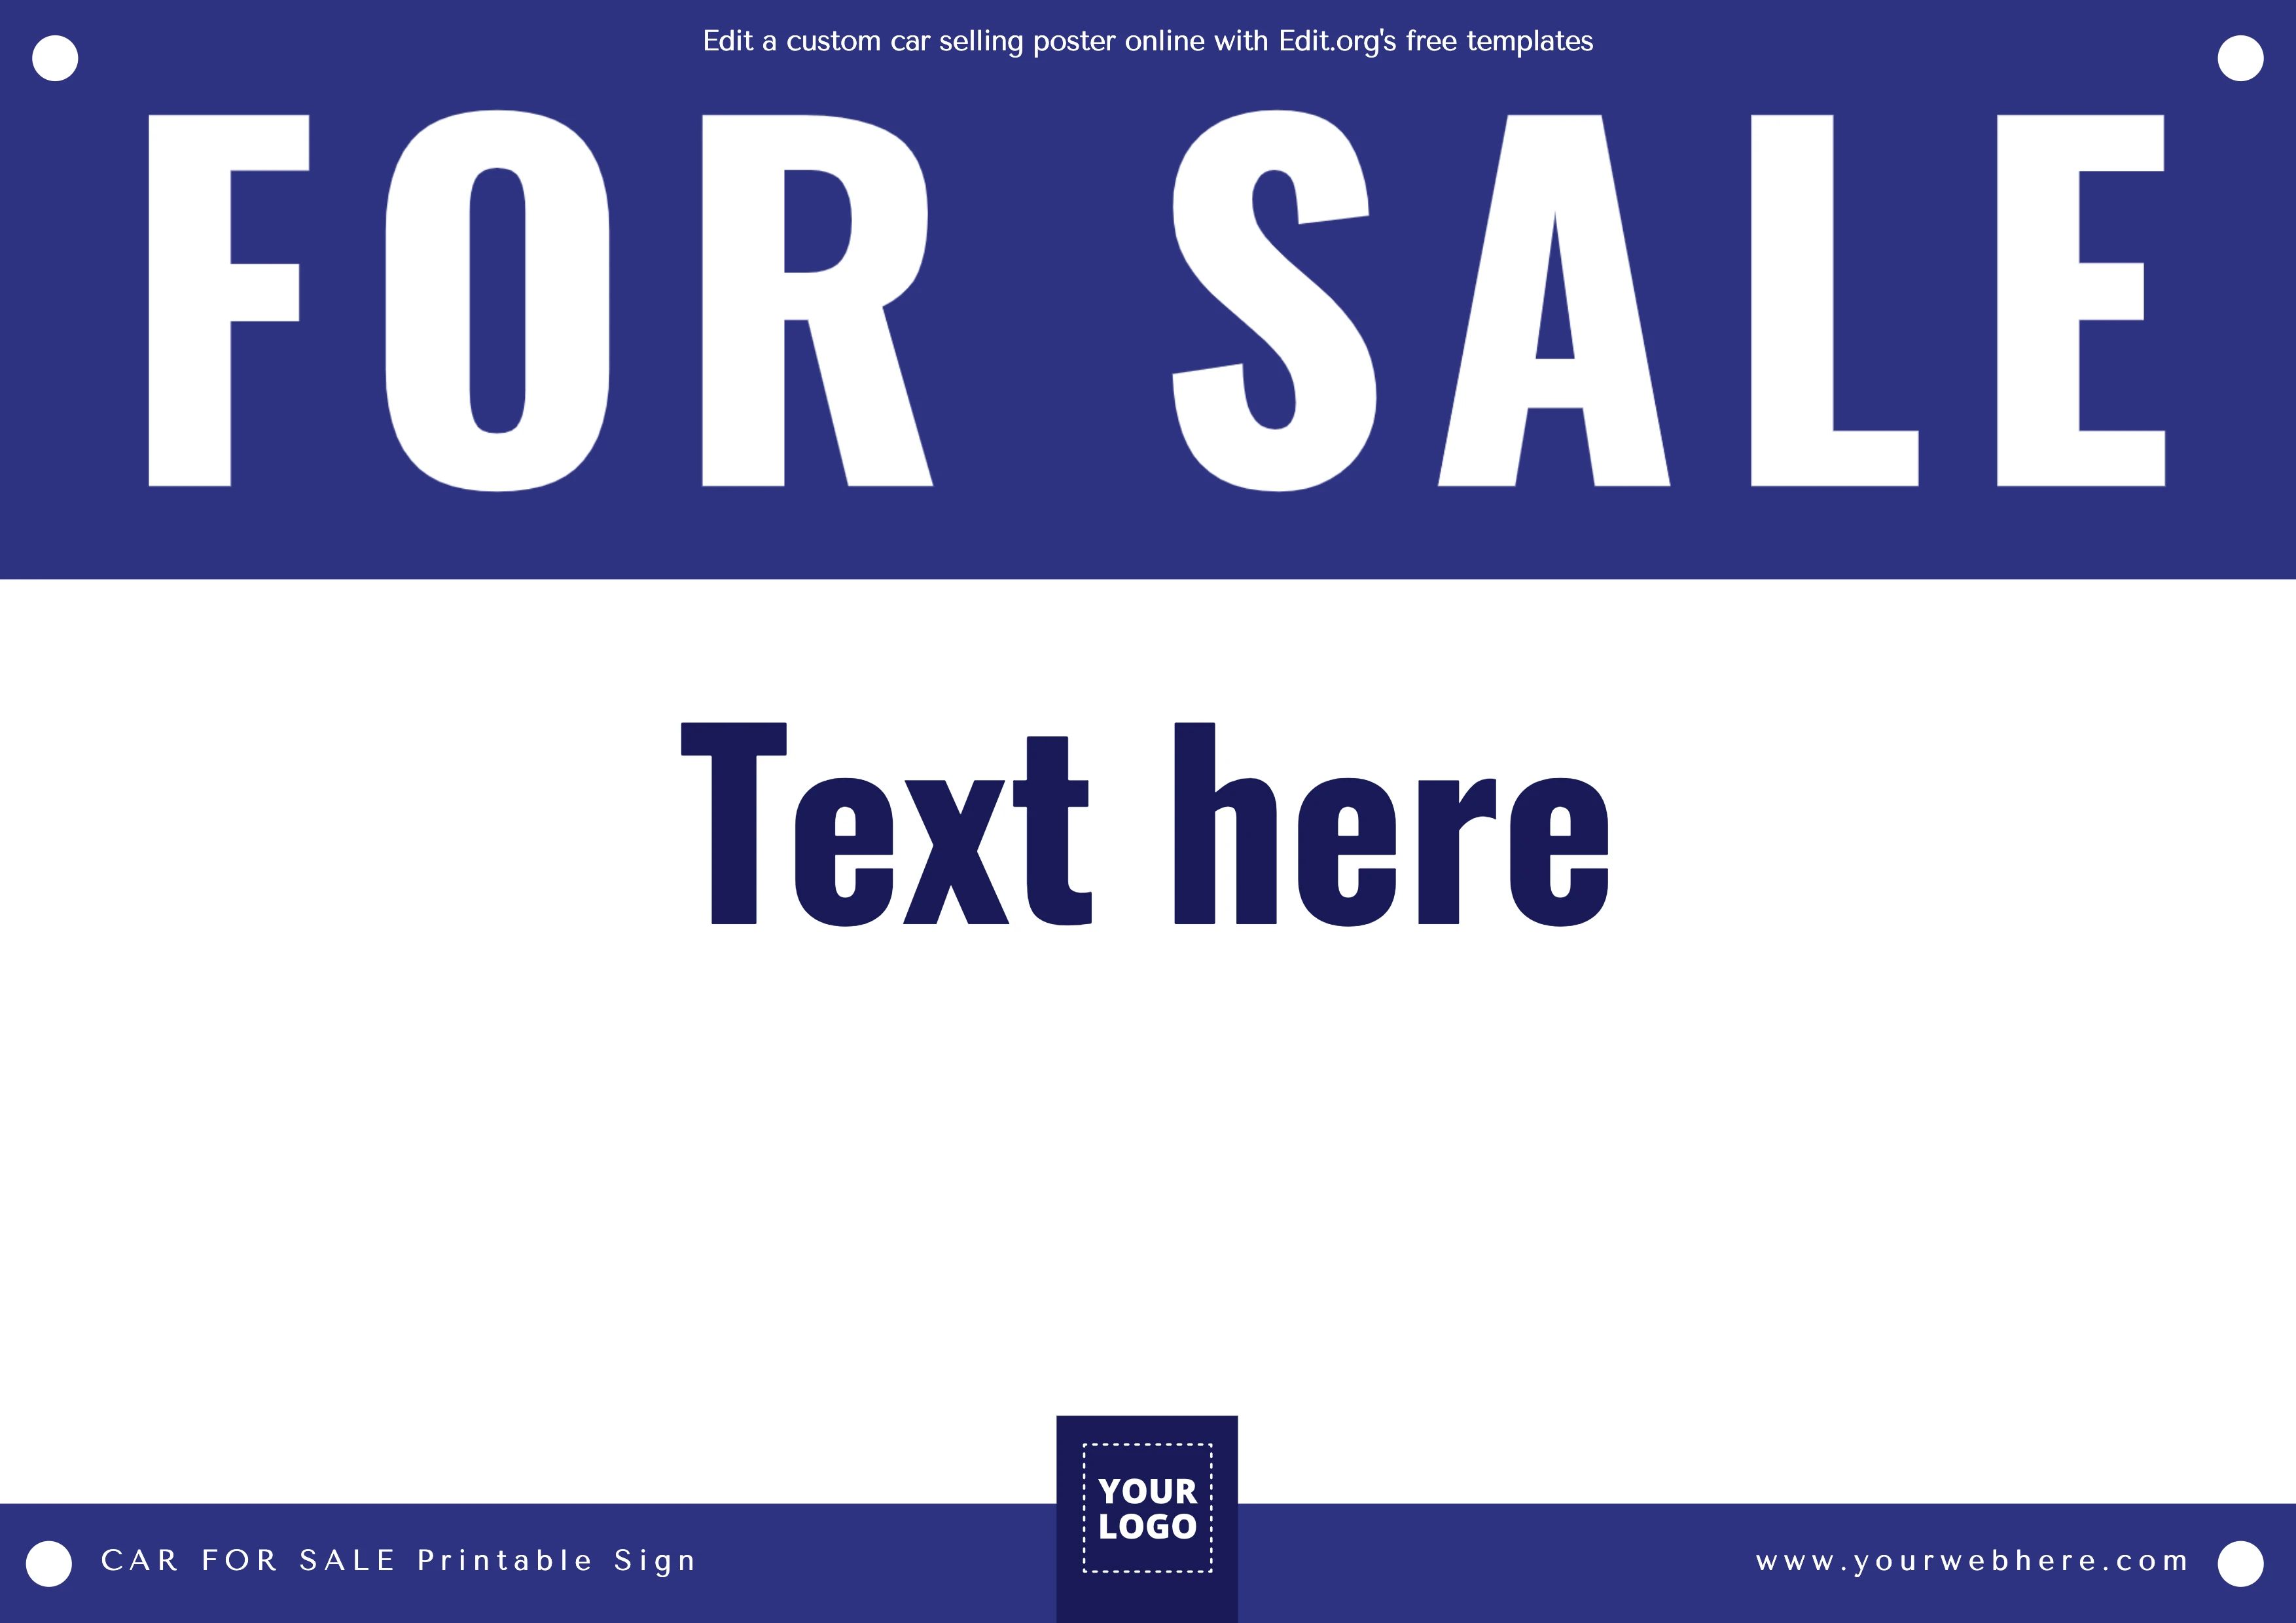 Free customizable Auto for Sale sign printable